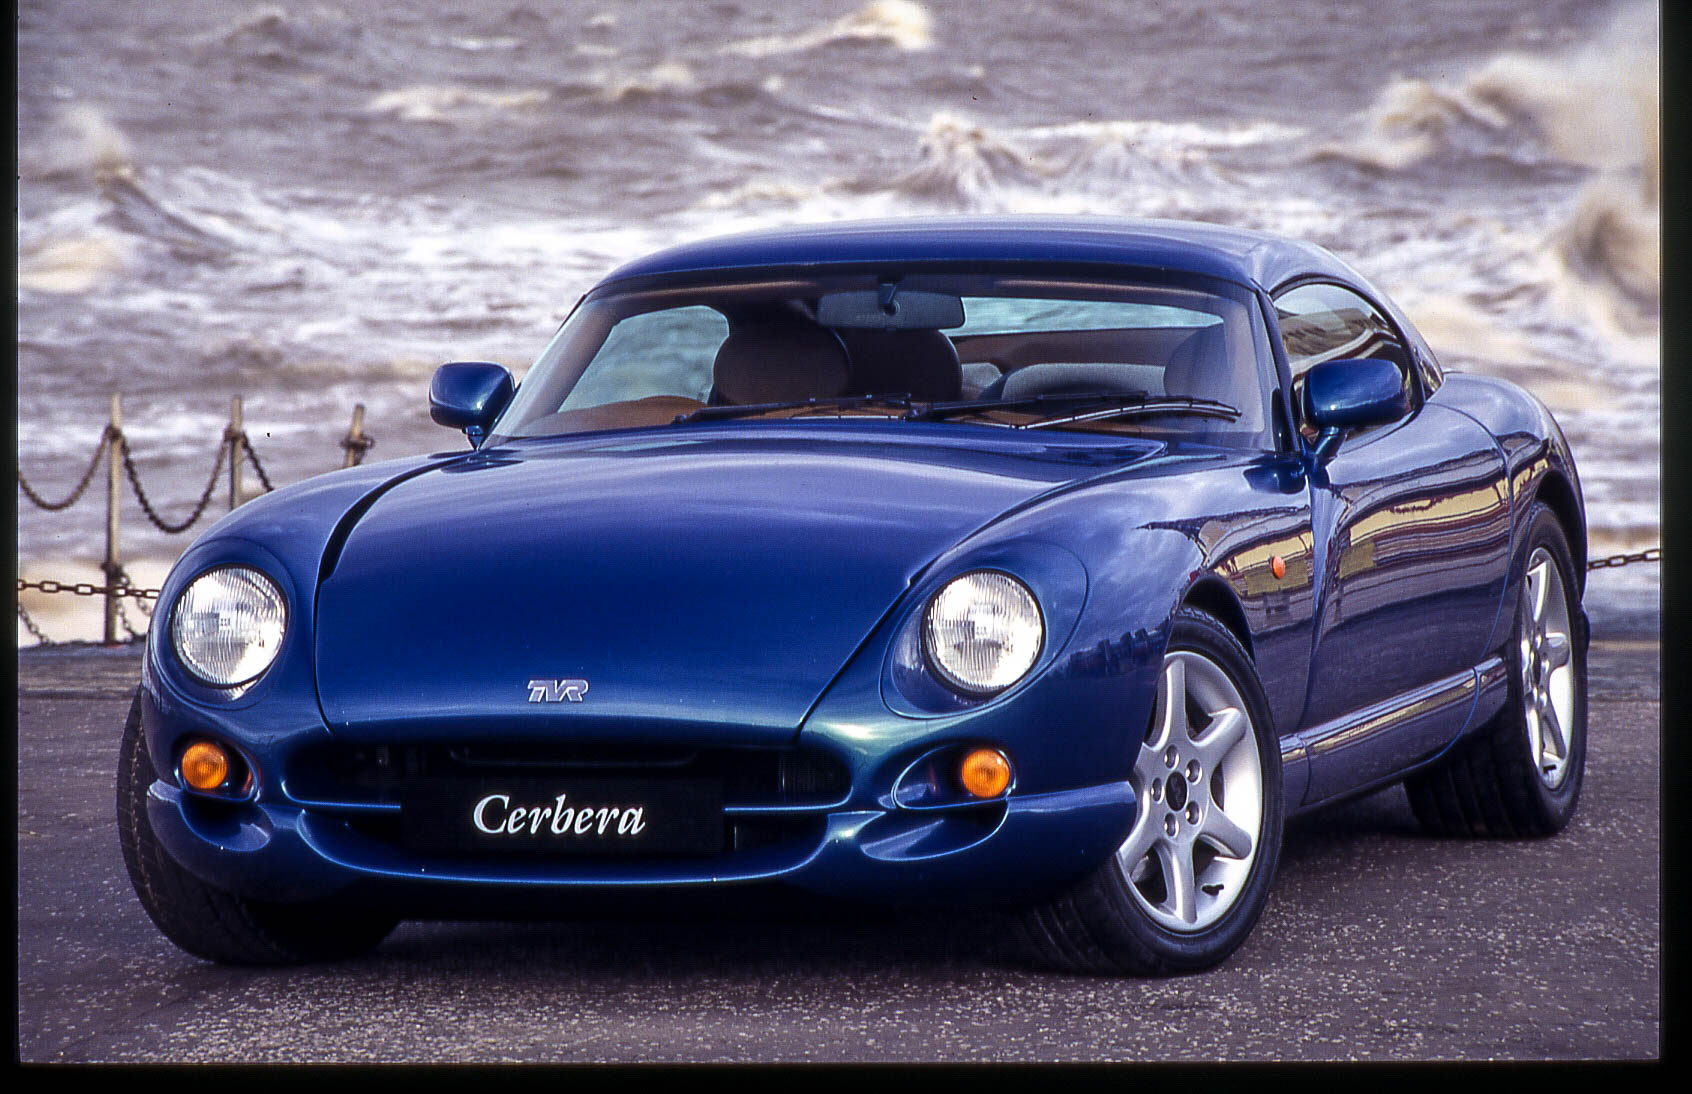 The Cerbera was one of the TVR's first 2+2 models